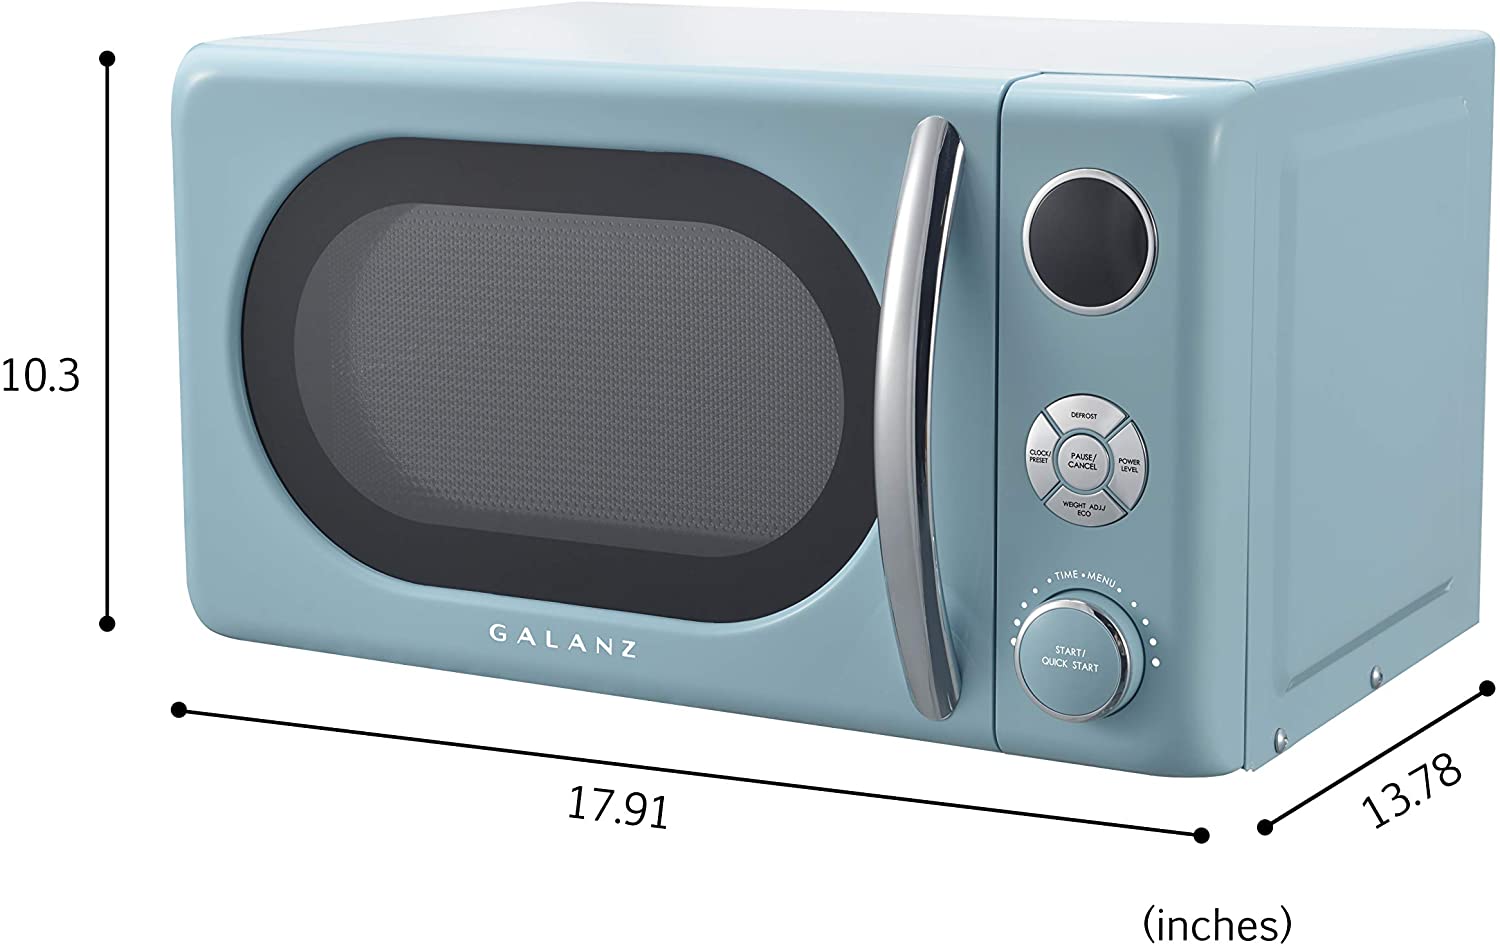 Galanz Retro 700watts Microwave Oven For Home Use 2020 | Jikonitaste